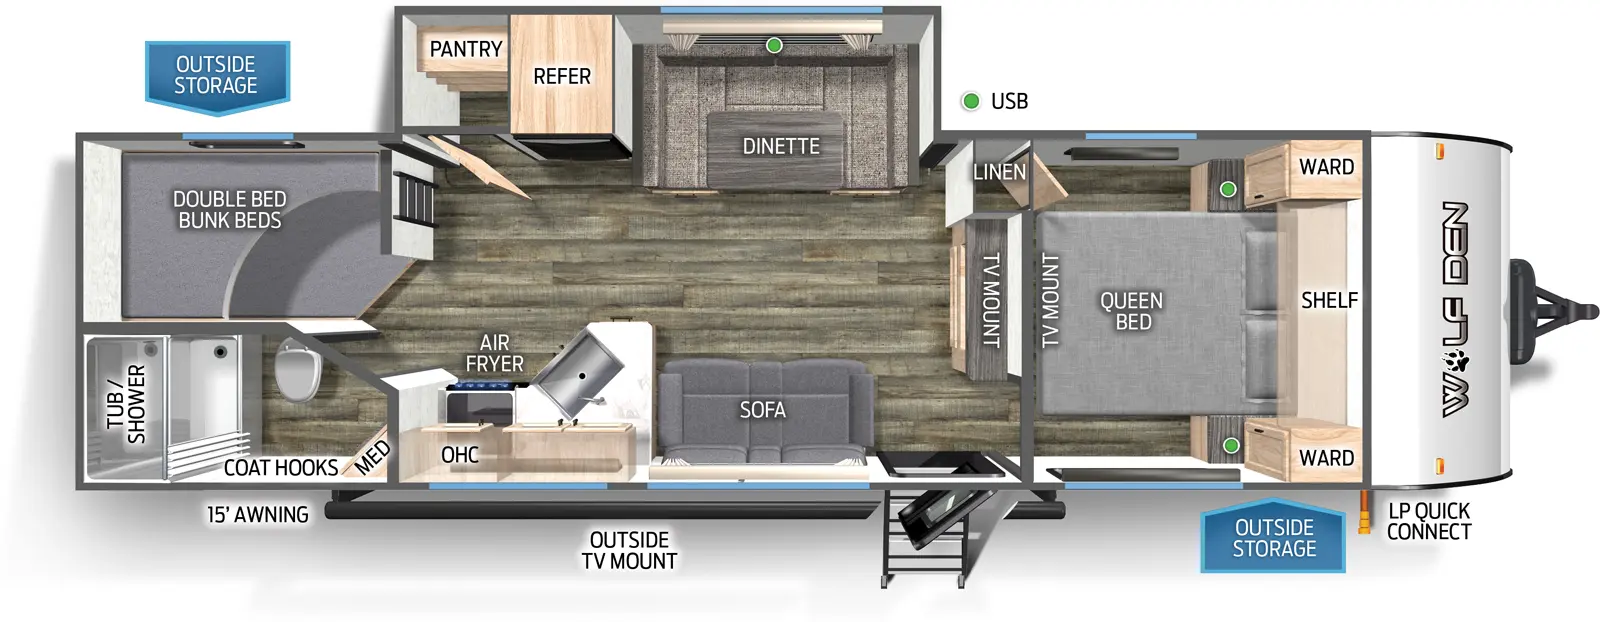 The 272BRB has one slideout and one entry. Exterior features LP quick connect, outside storage, outside TV mount, and 15 foot awning. Interior layout front to back: foot-facing queen bed with shelf above, wardrobes on each side, linen closet, and TV mount; TV mount along inner wall; off-door side slideout with dinette, refrigerator, and pantry; door side entry, sofa, peninsula kitchen counter with sink wraps to door side with overhead cabinet and air fryer; rear off-door side double bed bunk beds; rear door side full bathroom with coat hooks and medicine cabinet.